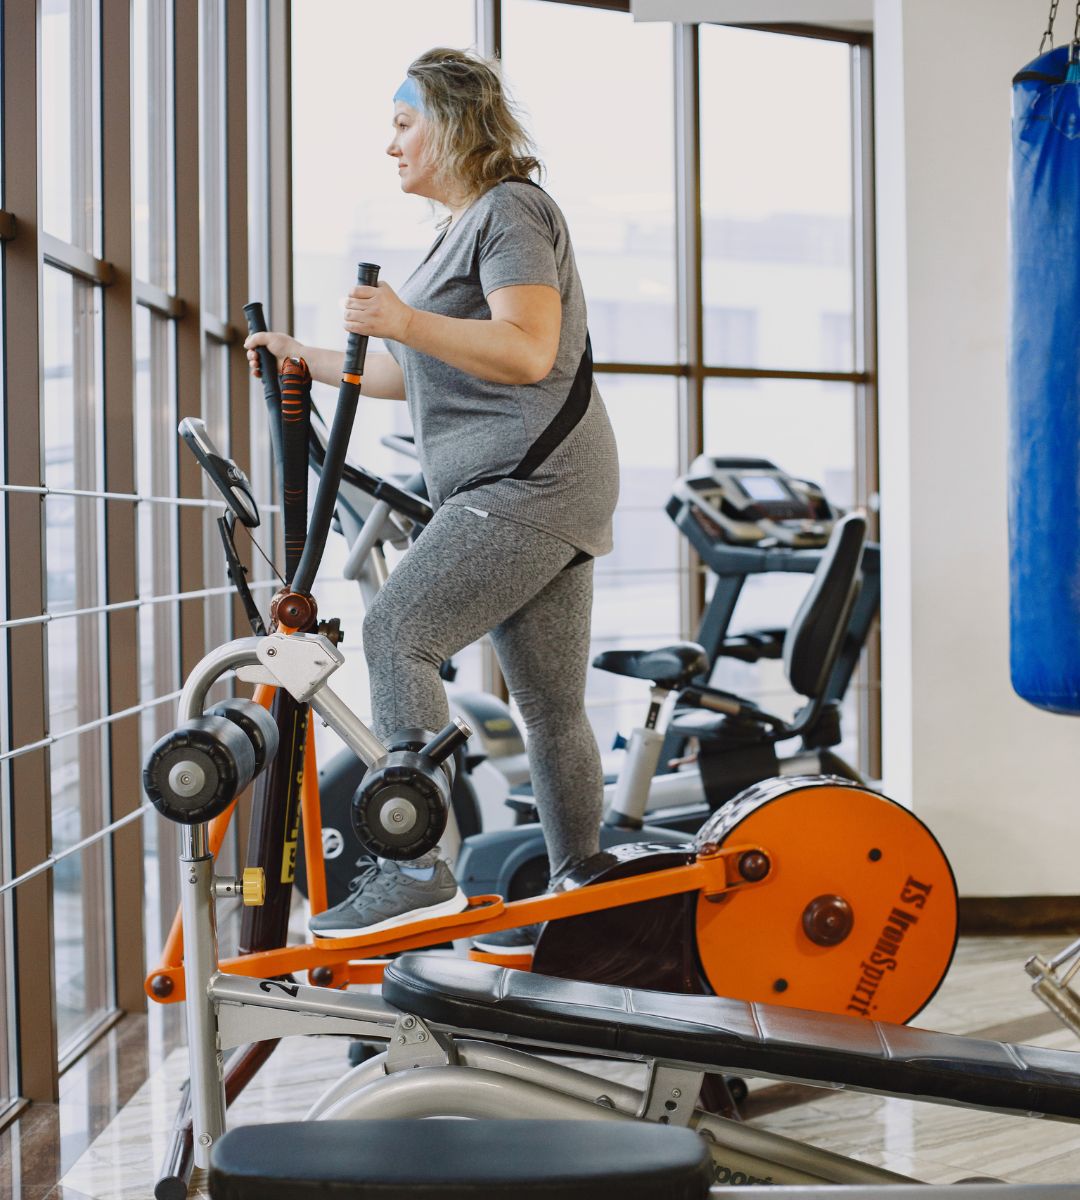 Benefits of Using an Elliptical for Weight Loss